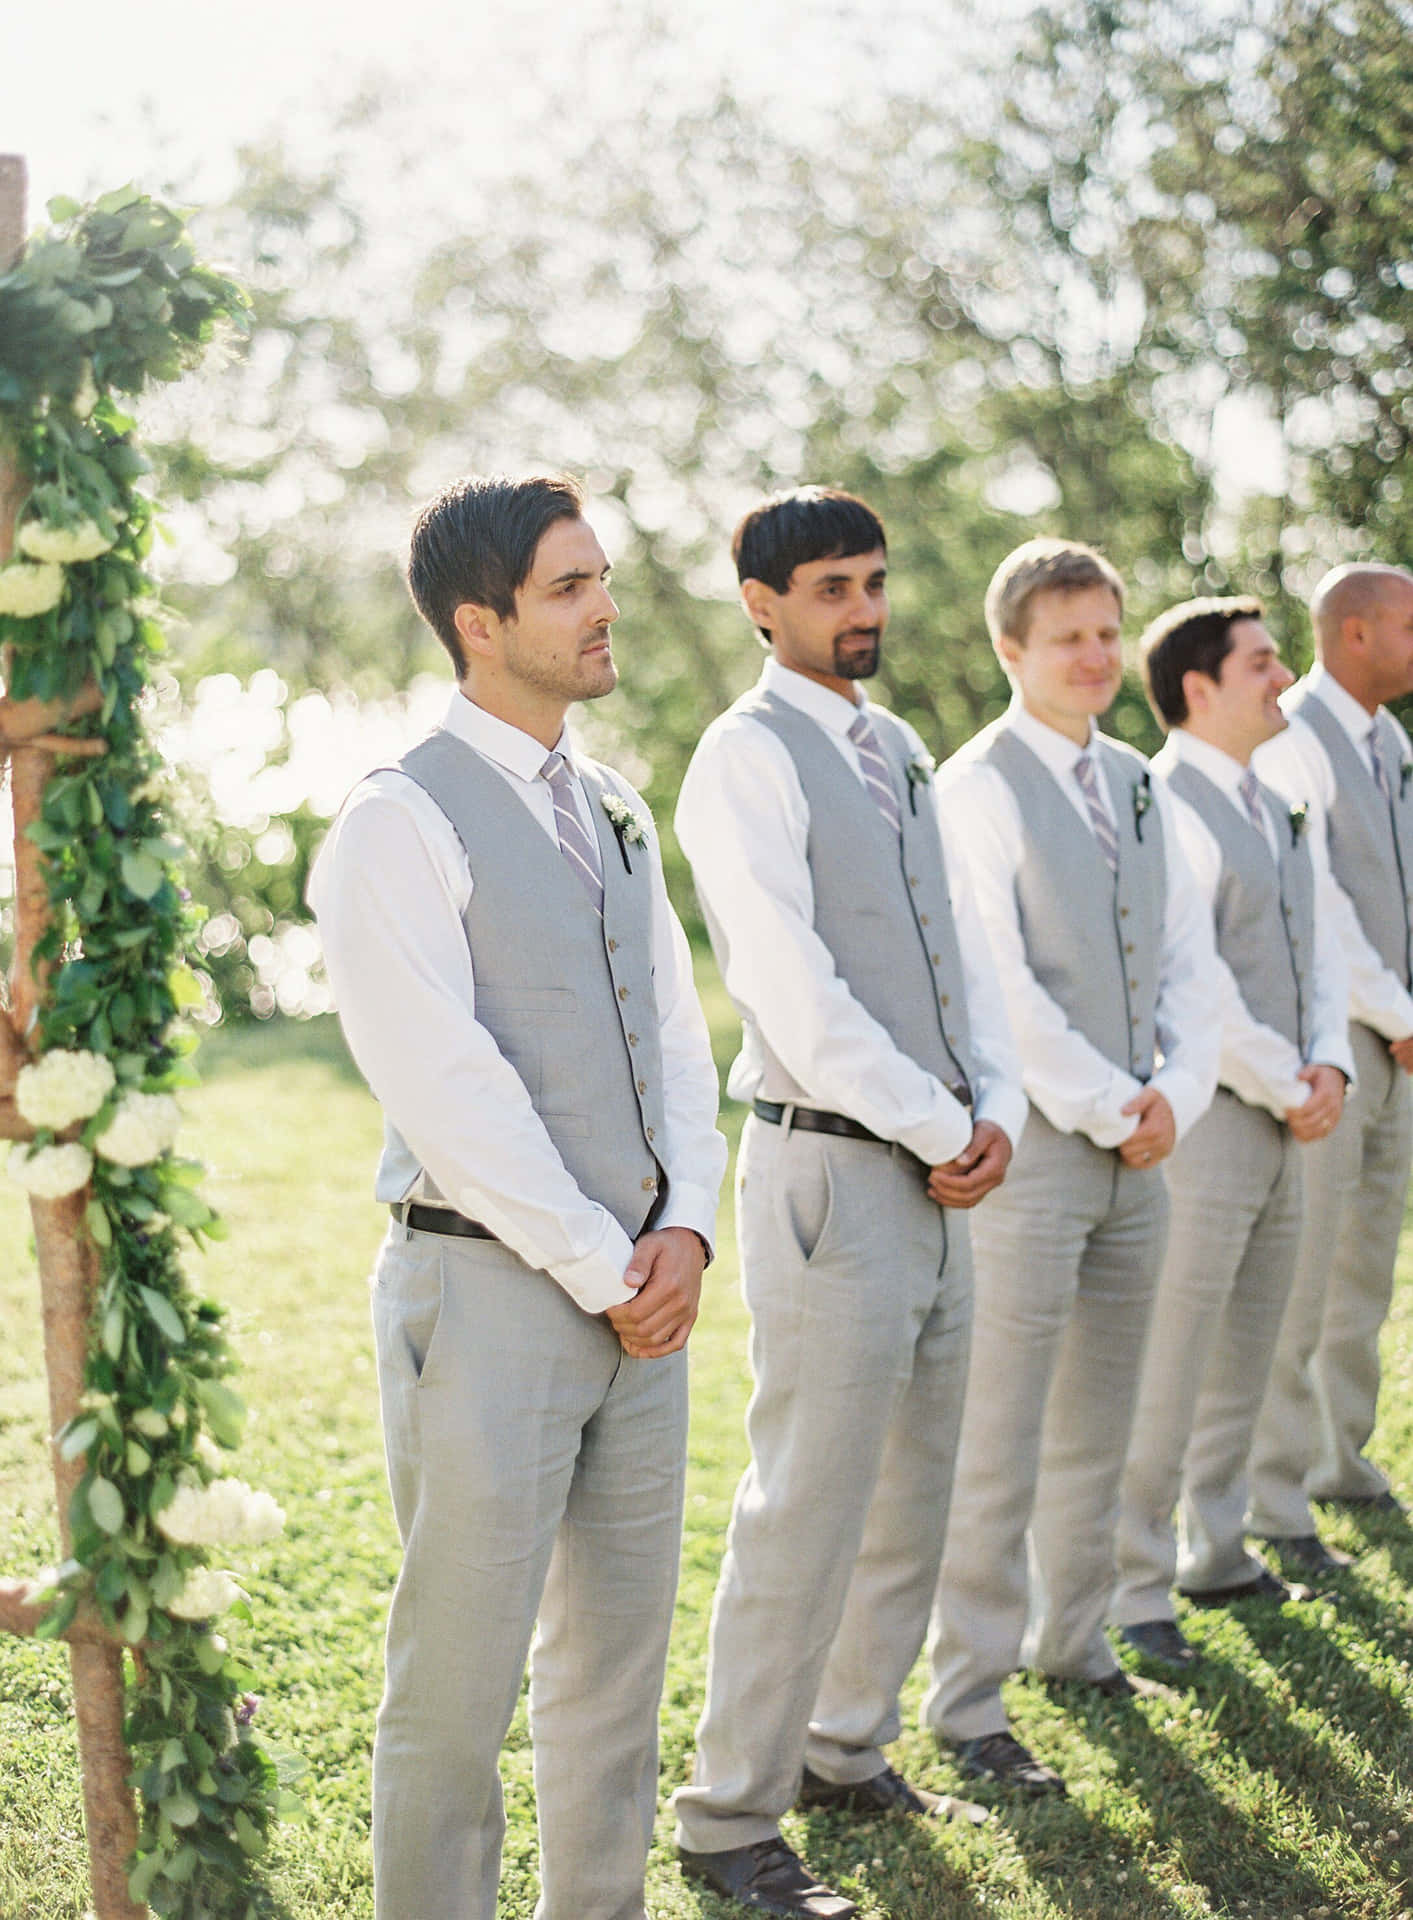 Professional and stylish groomsmen looking suave in their matching suits